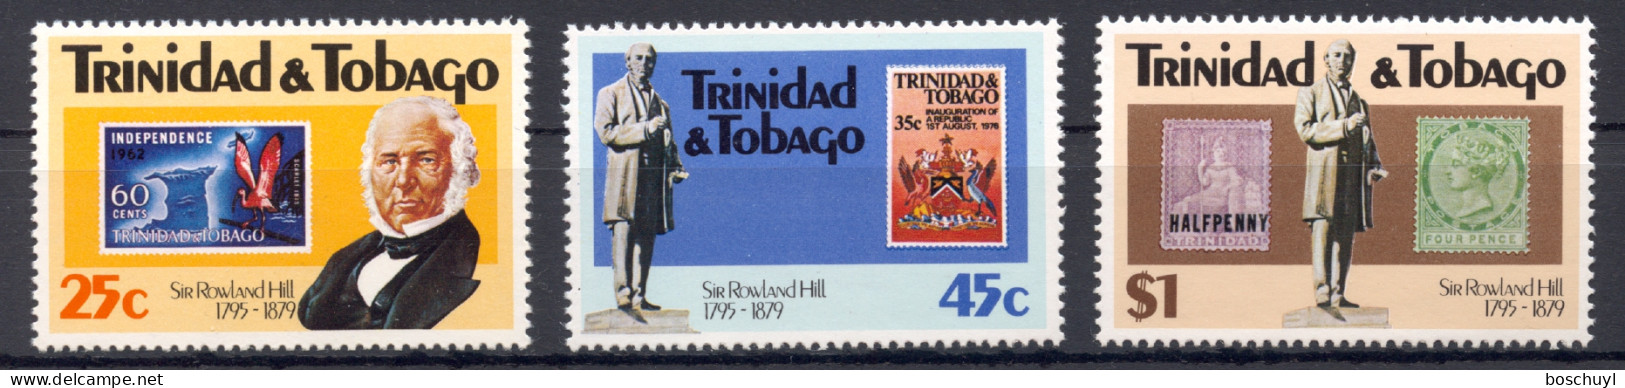 Trinidad And Tobago, 1979, Sir Rowland Hill, UPU, United Nations, Stamps On Stamps, MNH, Michel 401-403A - Trinidad & Tobago (1962-...)